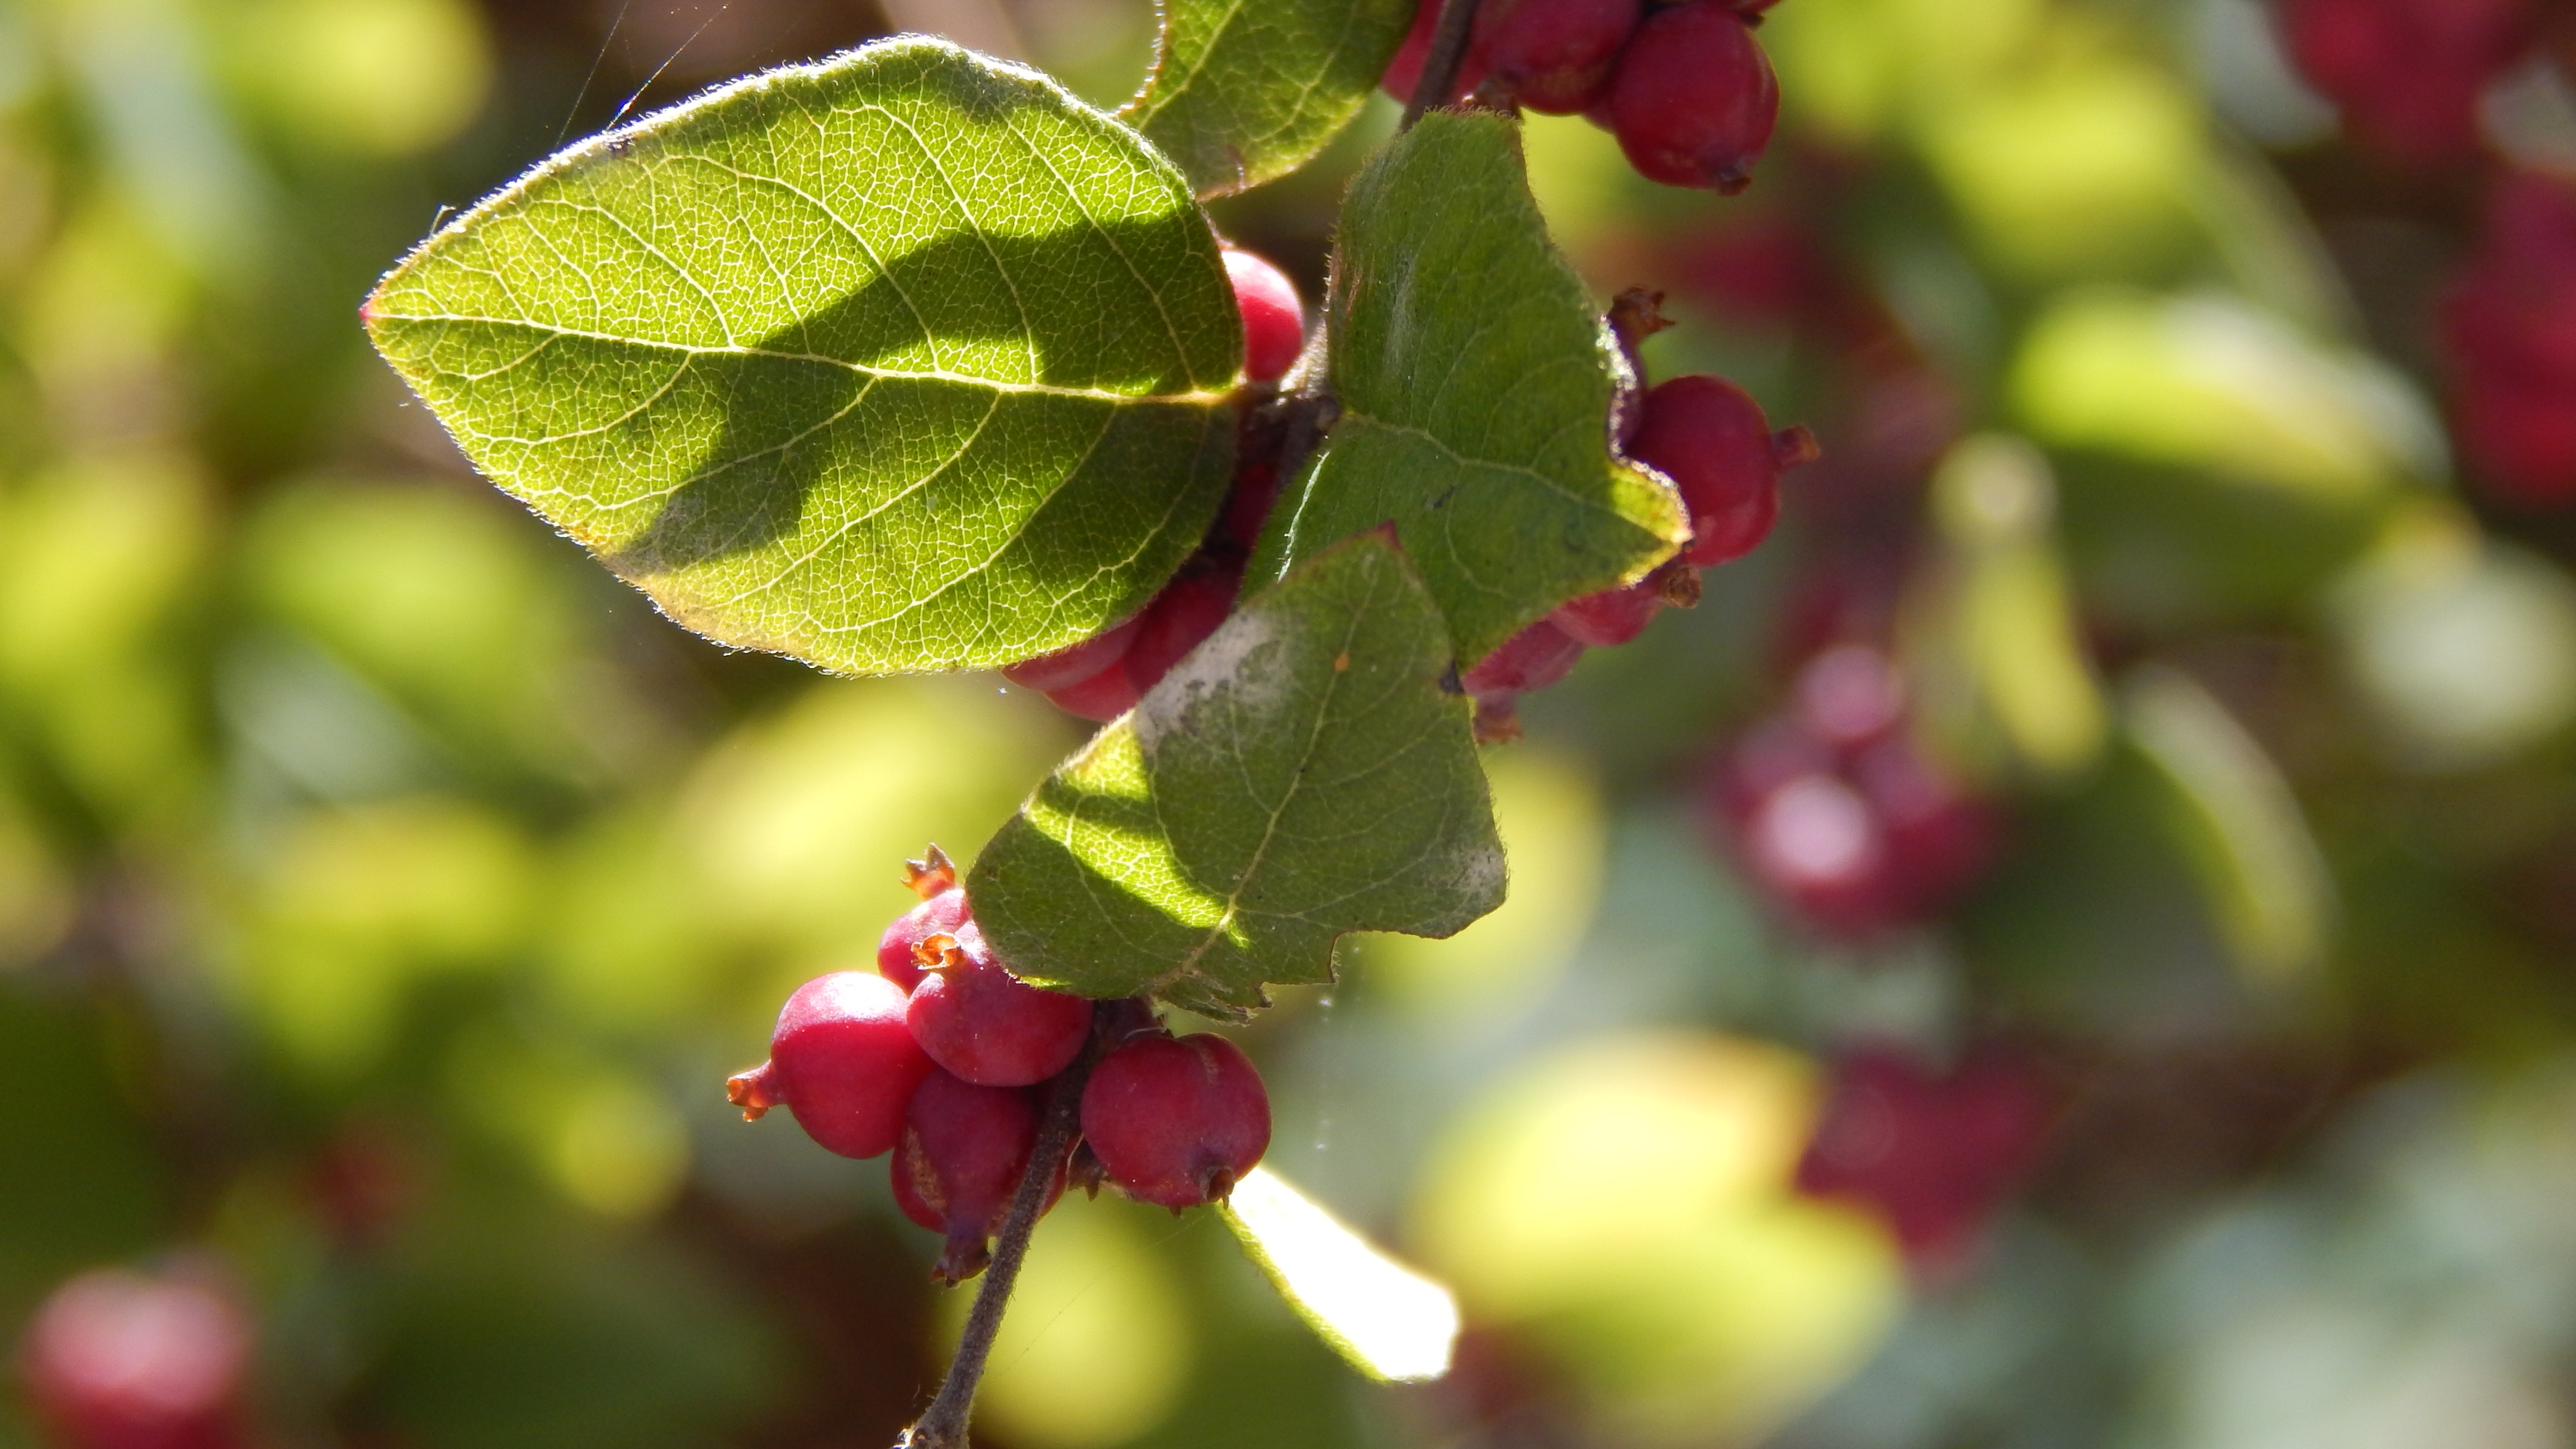 Compound in coralberry can help fight eye cancer